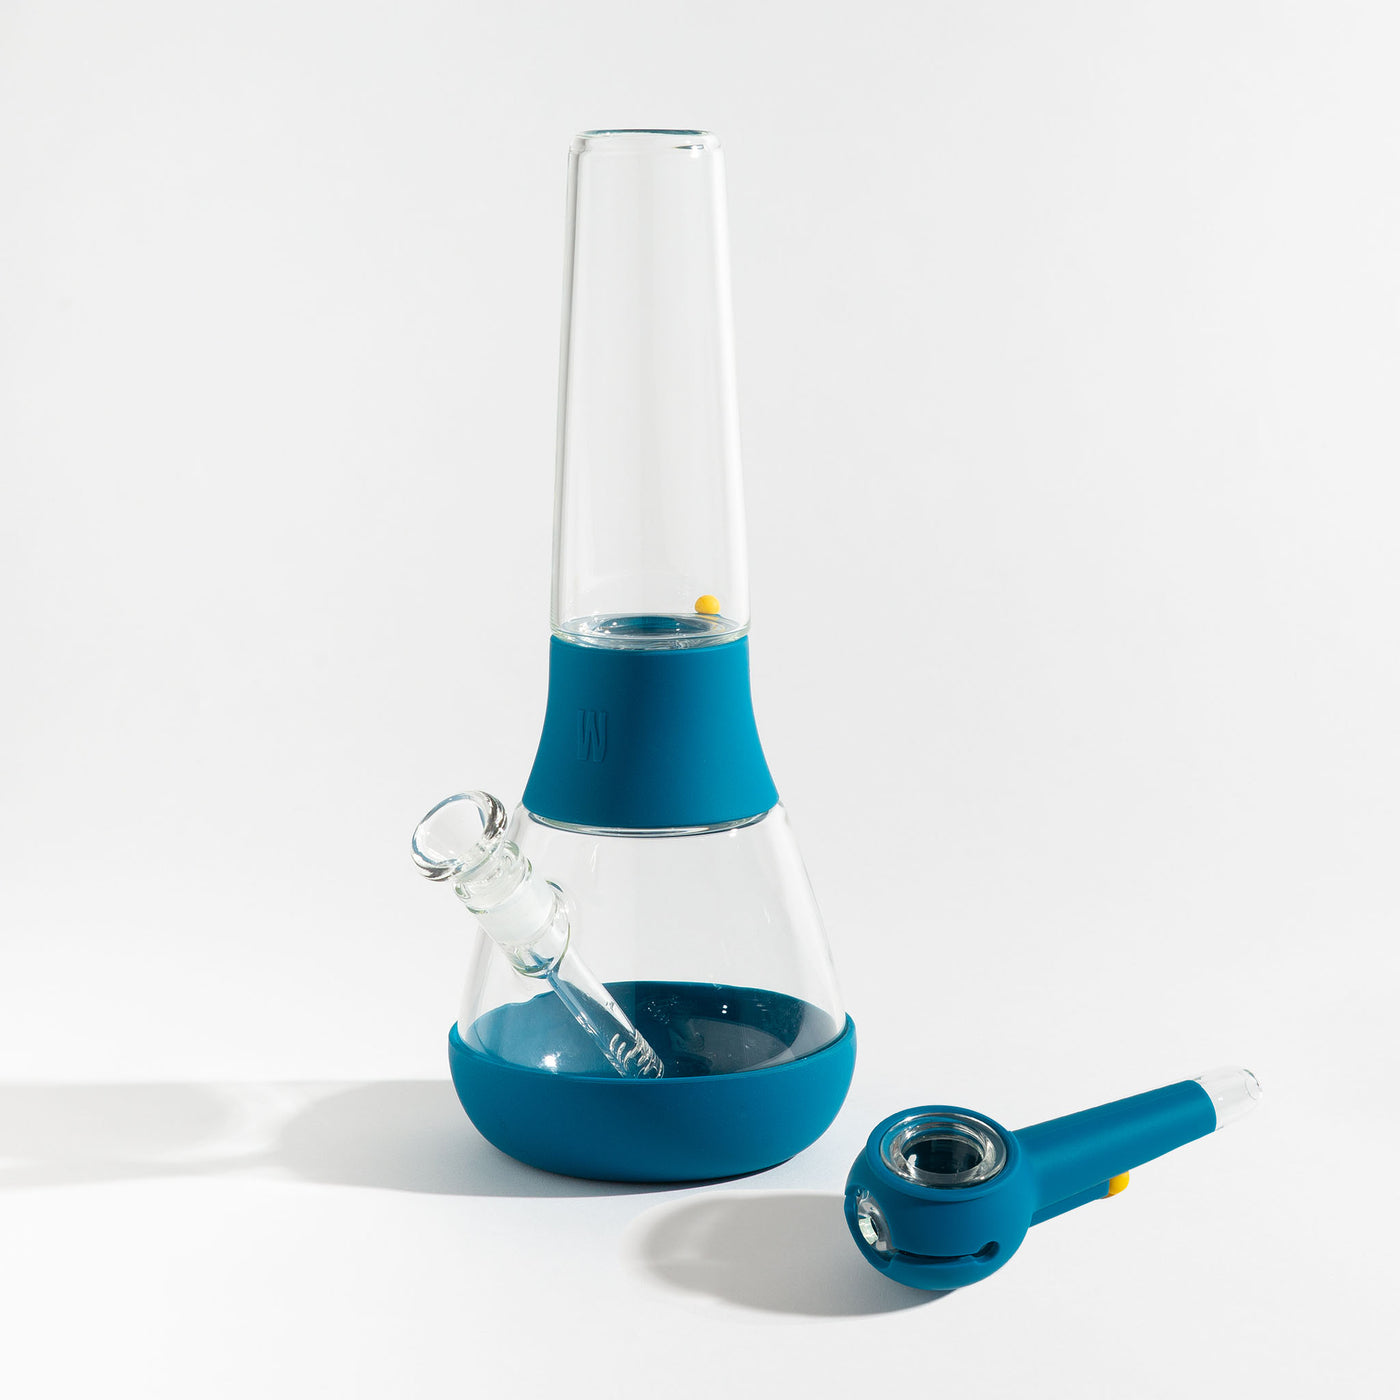 A bundle set of the Weeday modular glass bong and spoon pipe in midnight blue silicone covers on a white background.